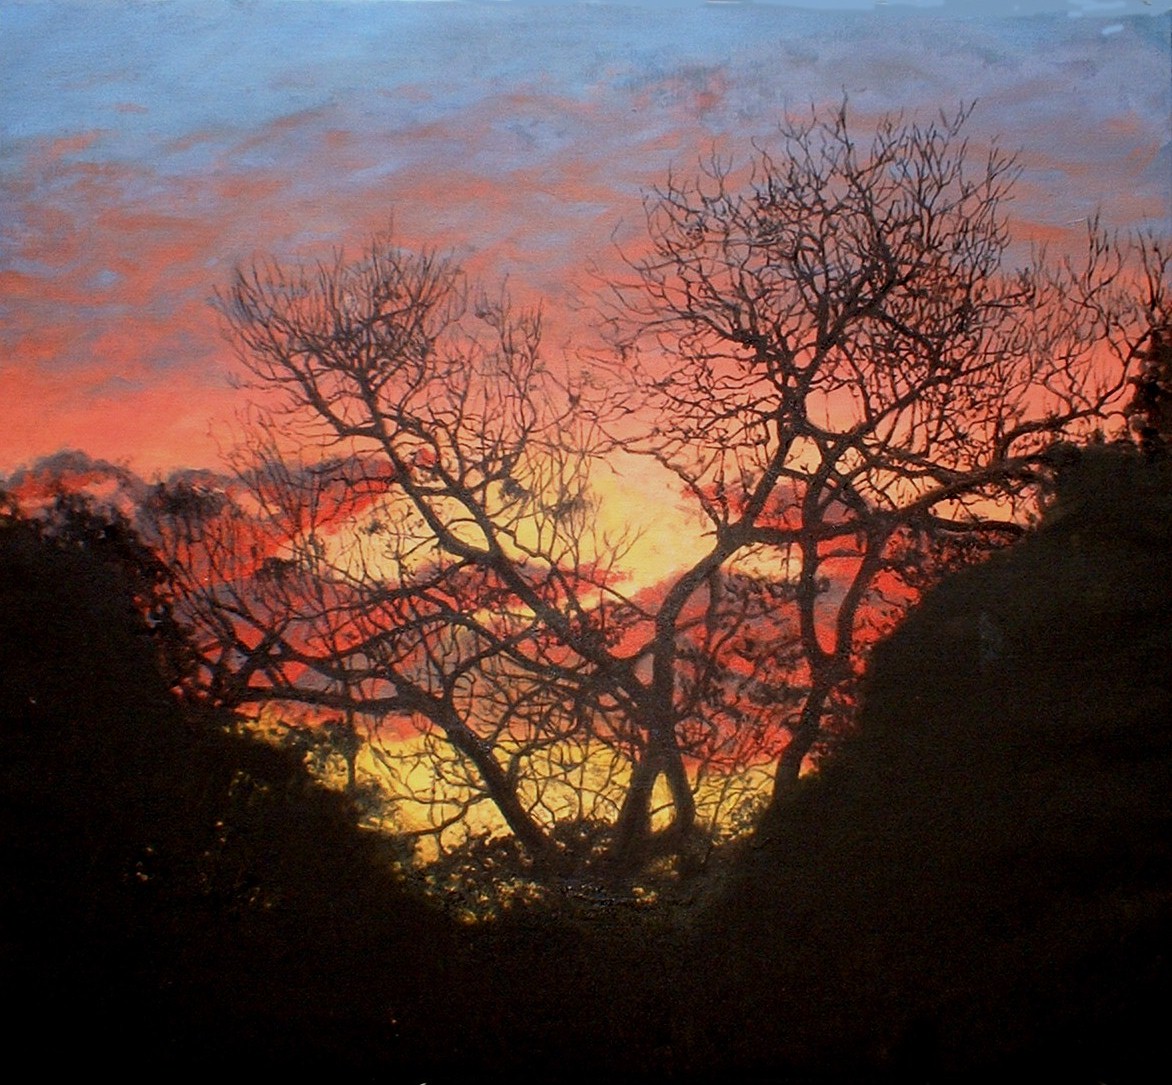 Jacaranda, oil on linen 42"x42", private collection